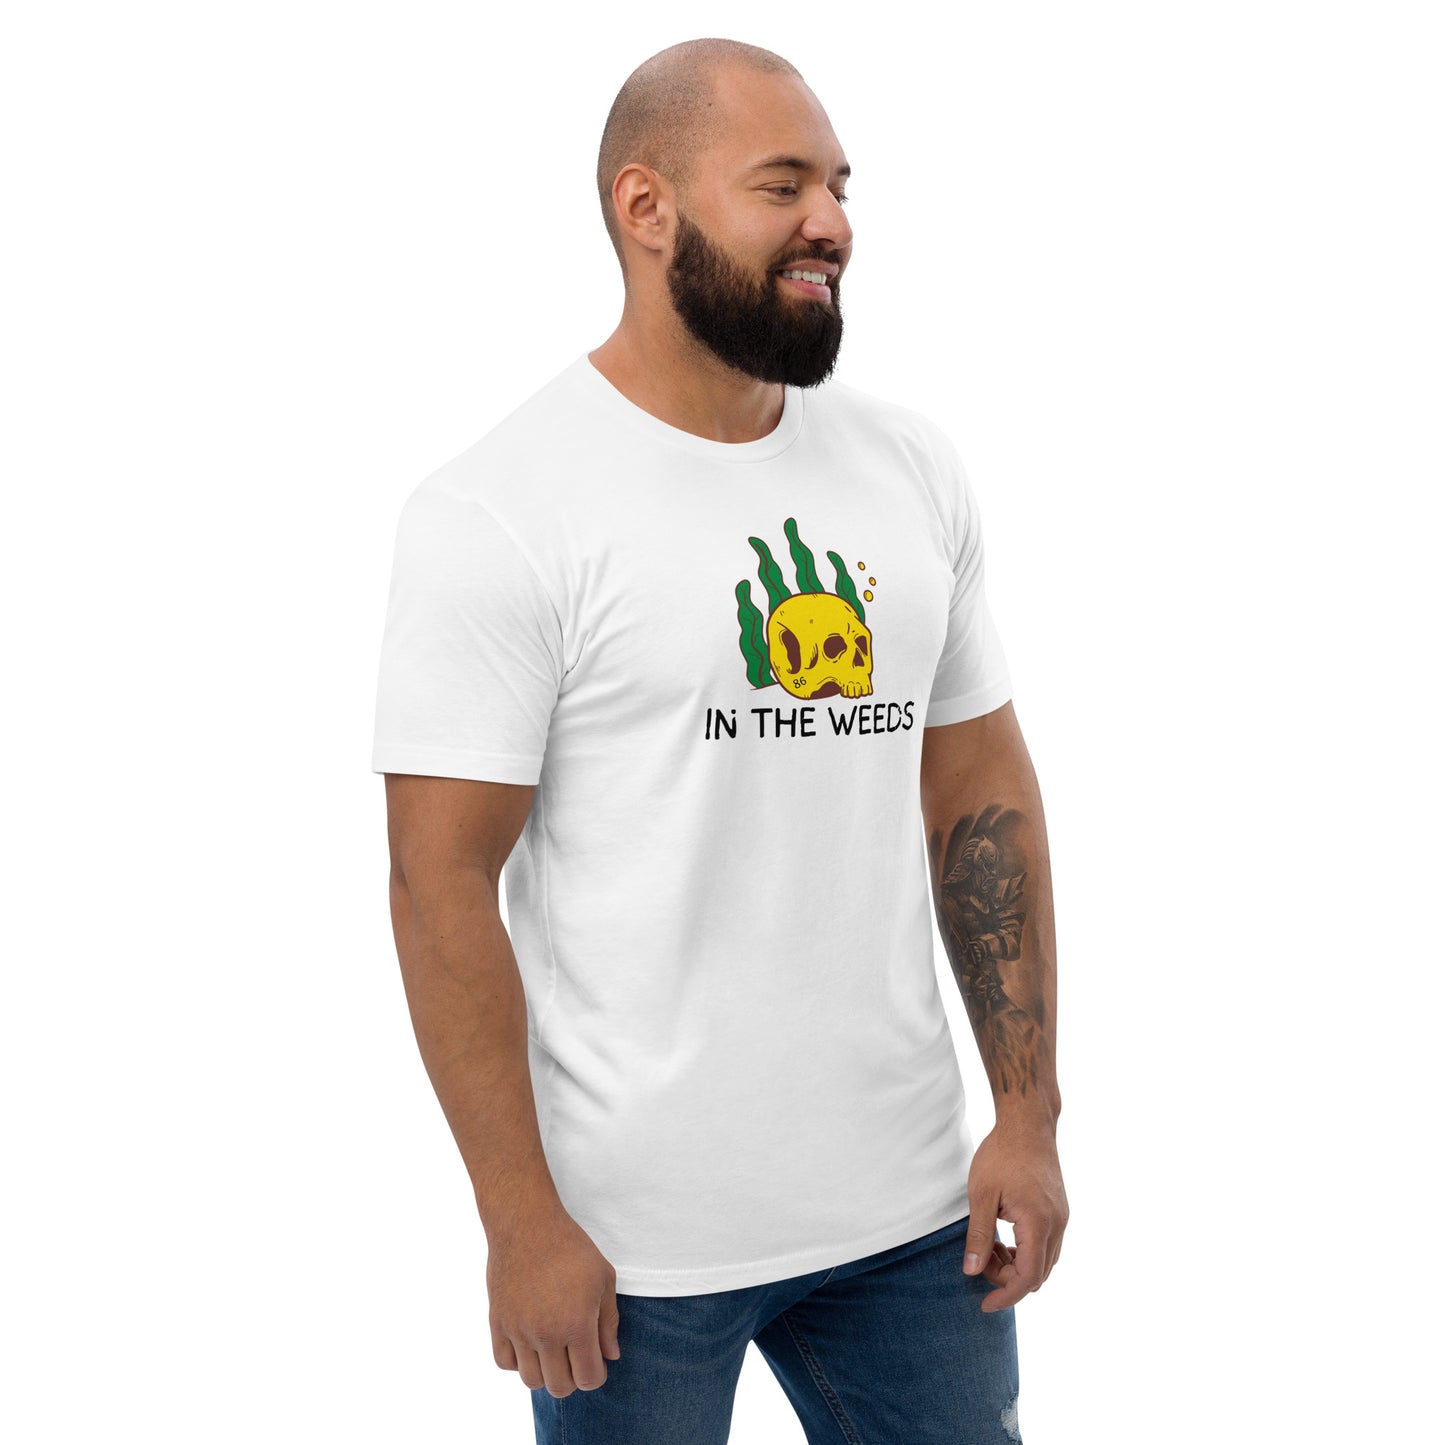 IN THE WEEDS 2 Fitted Short Sleeve T-shirt